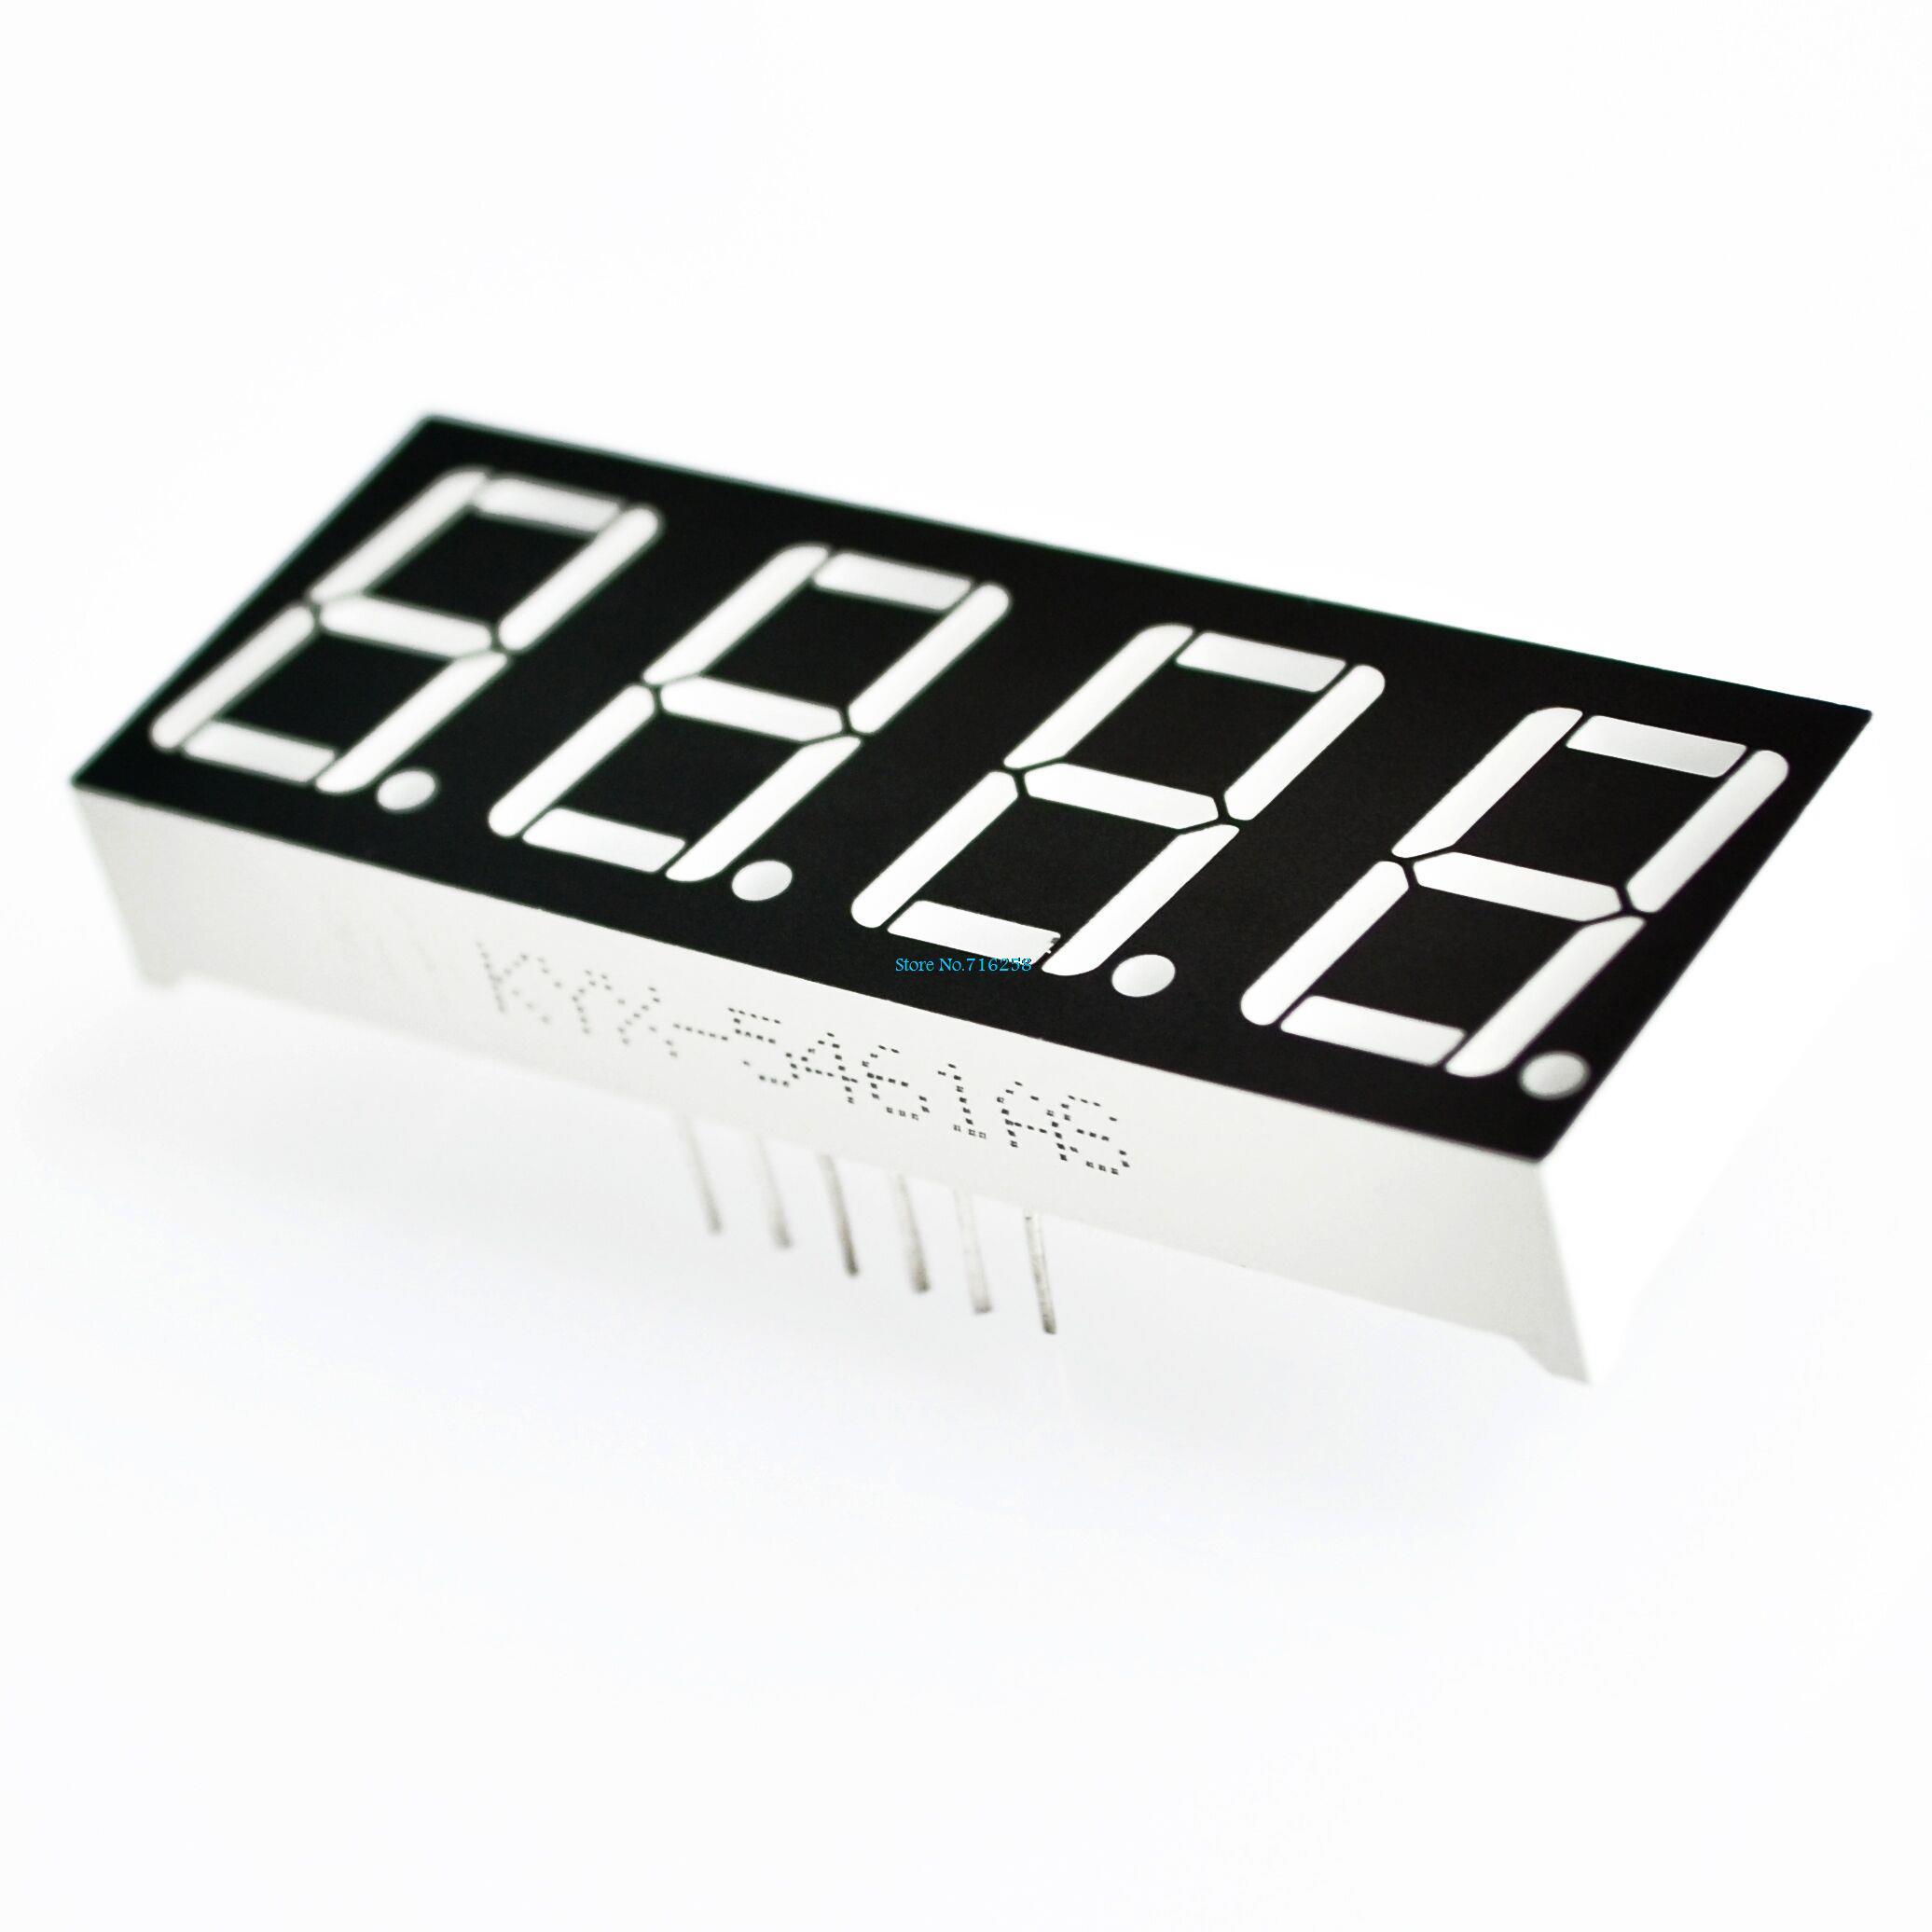 Best-Price-5pcs-lot-0-56-Inch-7-Seven-Segment-4-Digits-Red-Clock-LED-Display-Common-Anode-Time-12-Pins